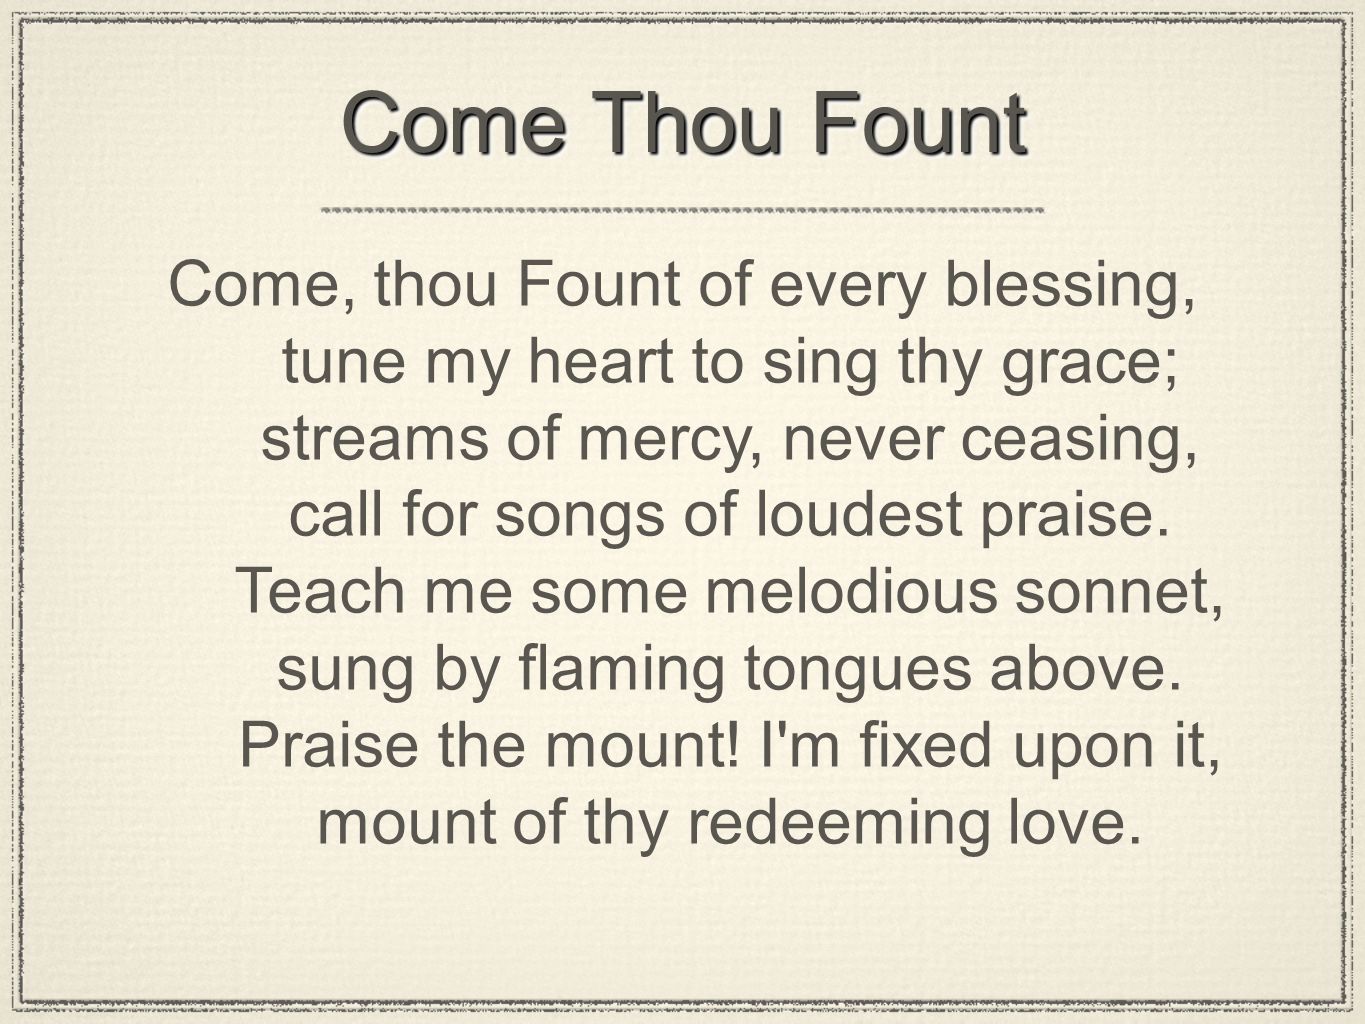 Come Thou Fount Come, thou Fount of every blessing, tune my heart to sing thy grace; streams of mercy, never ceasing, call for songs of loudest praise.